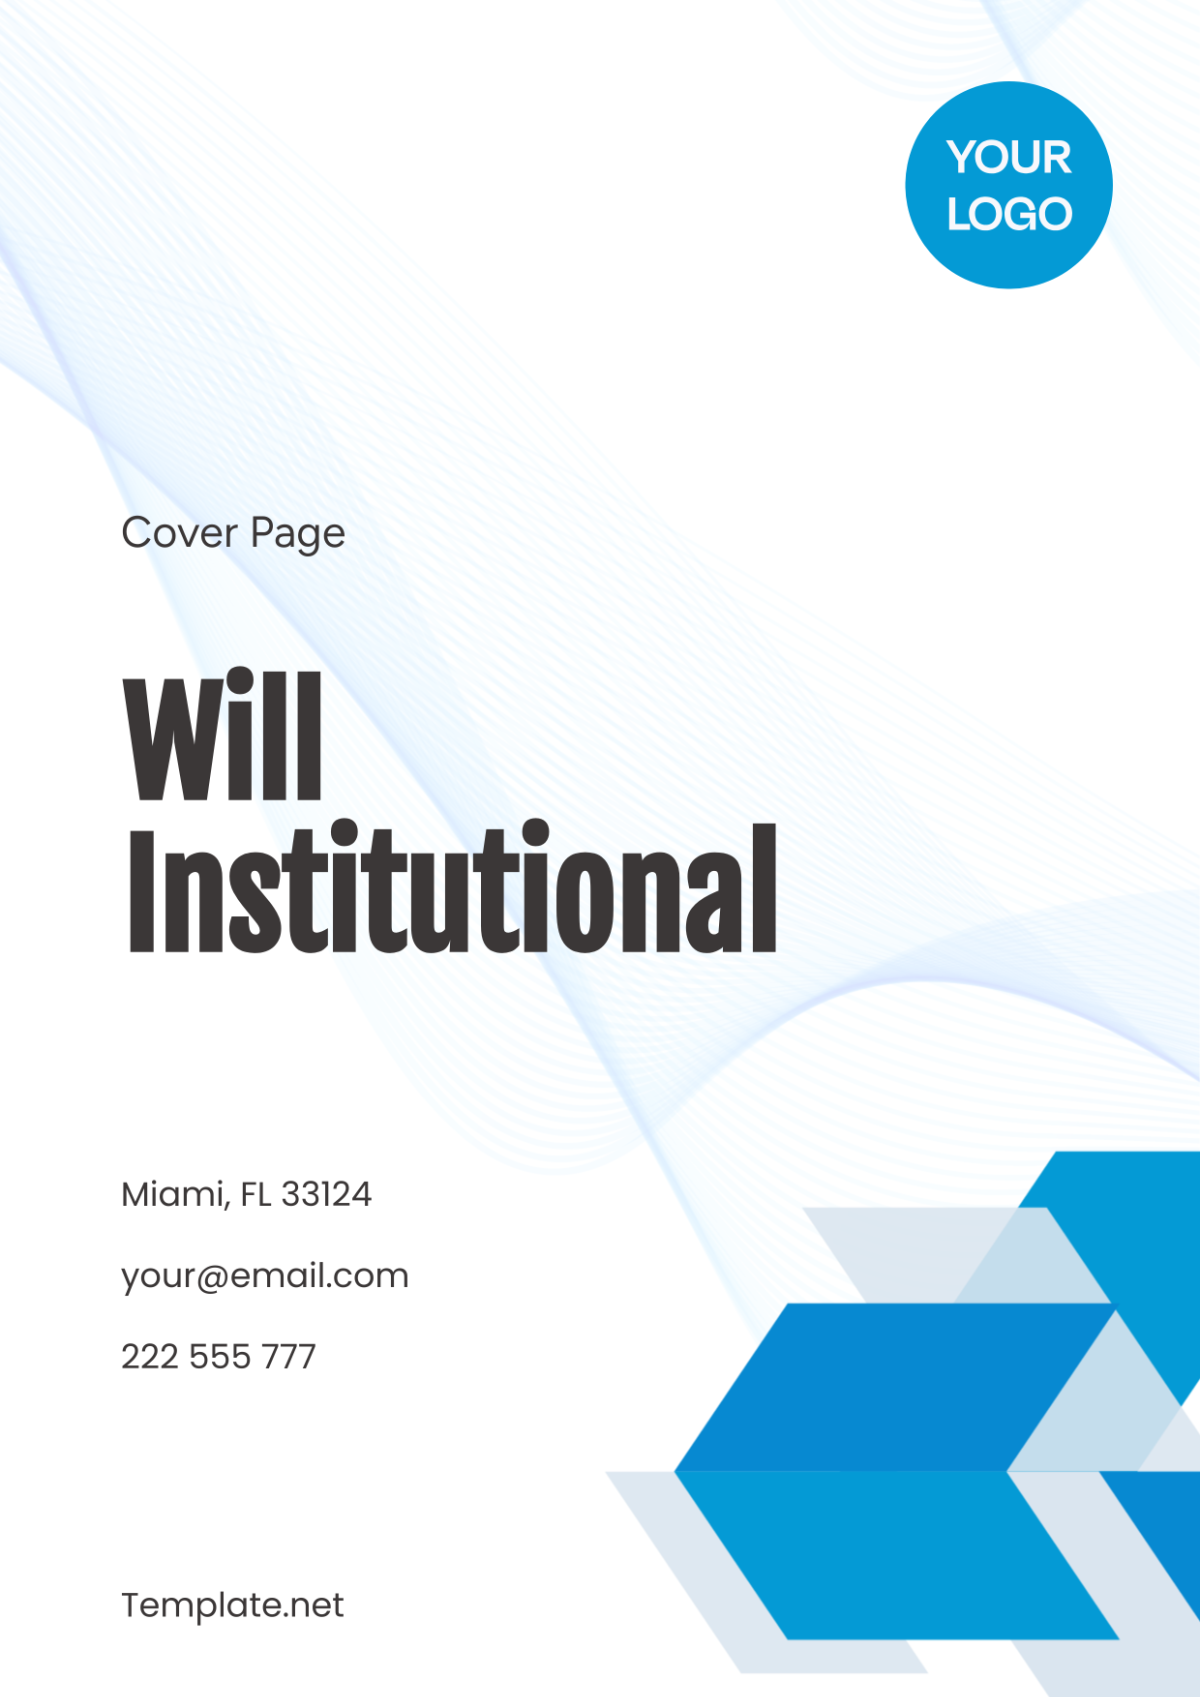 Will Institutional Cover Page Template